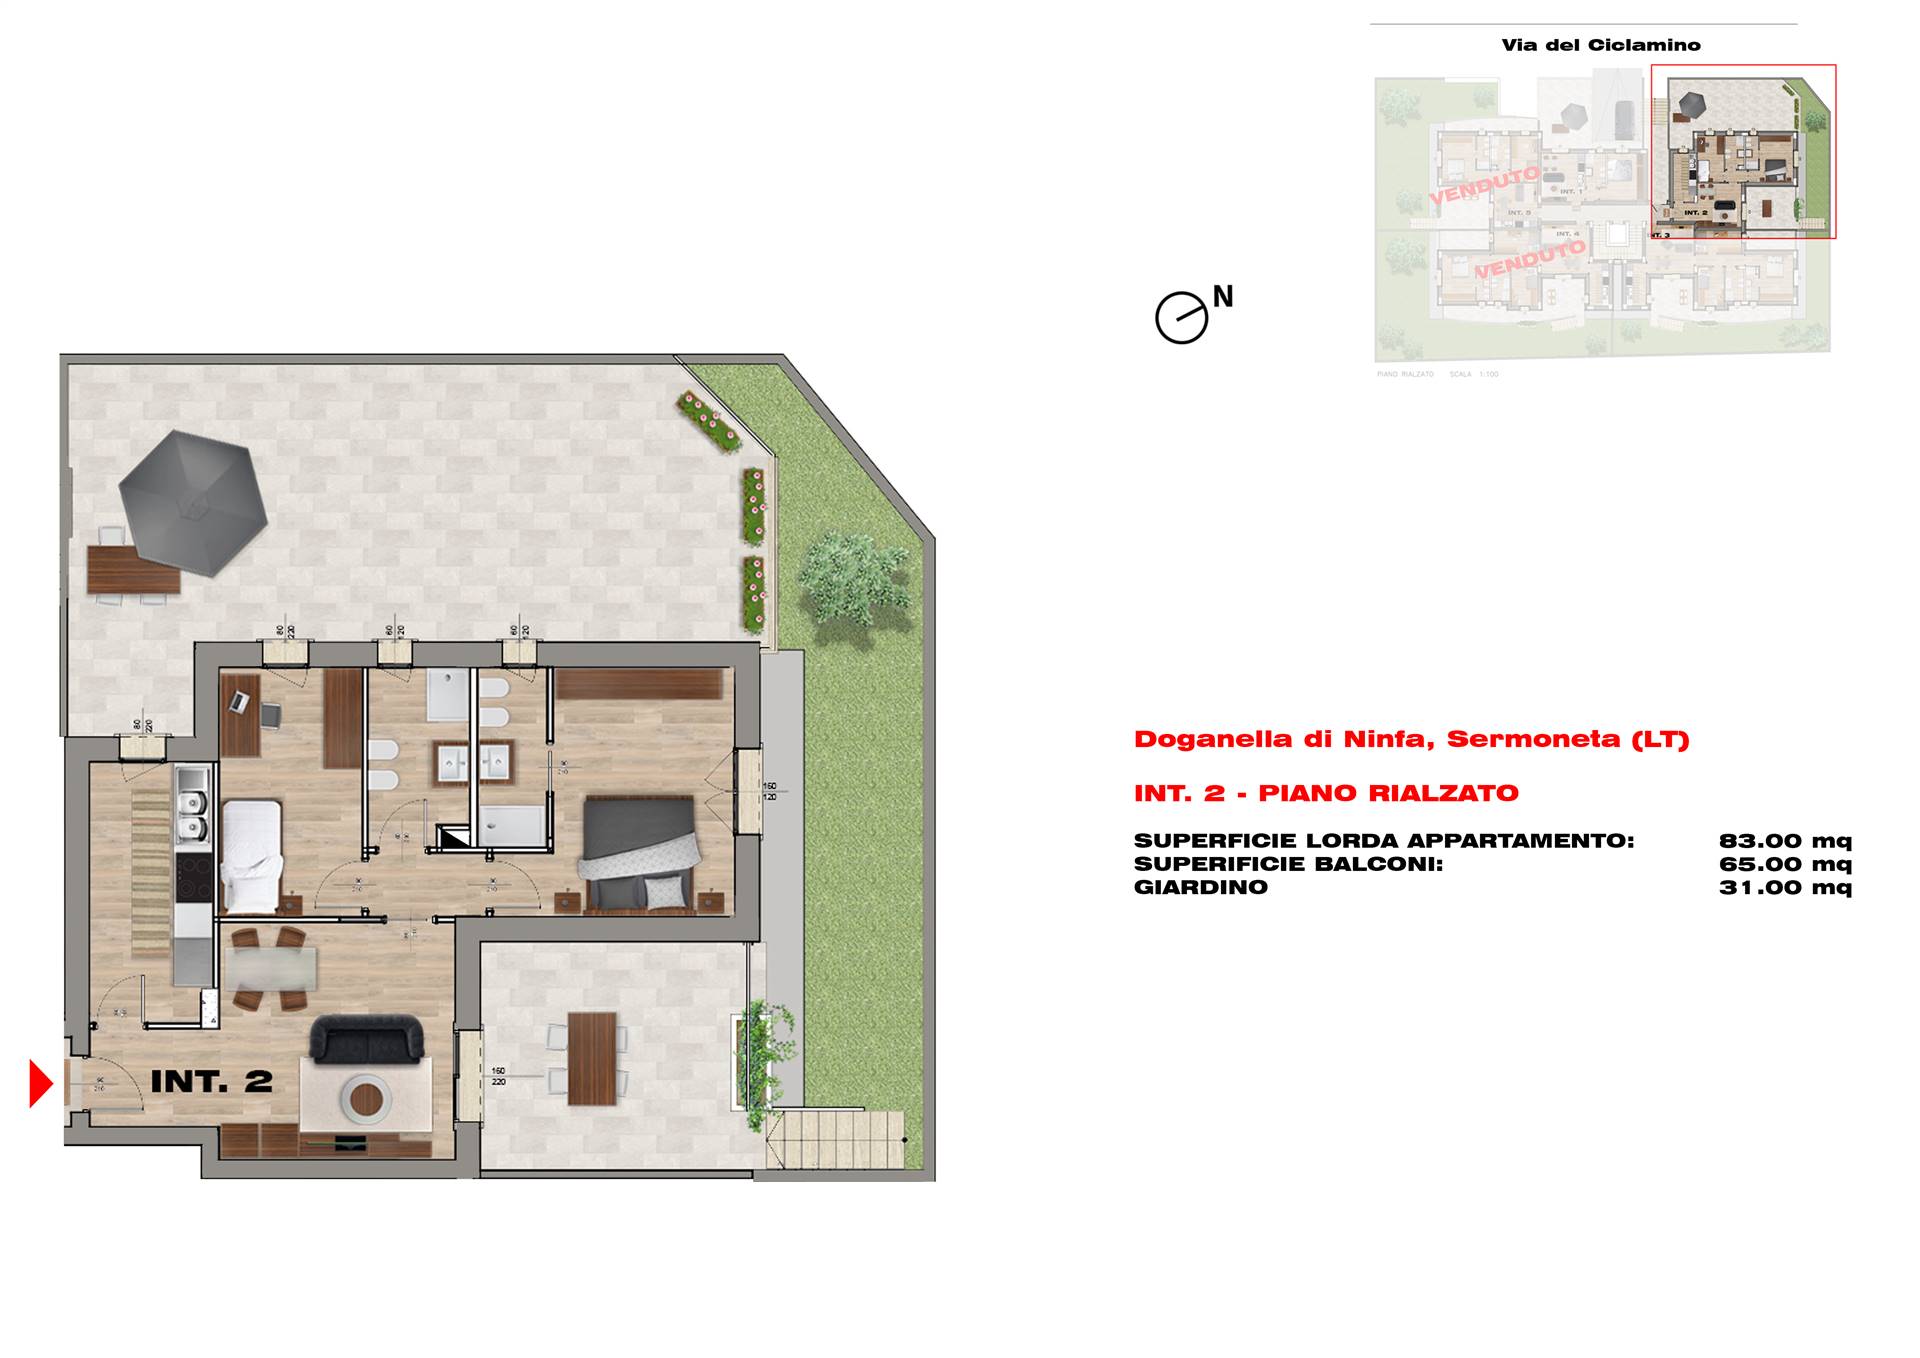 BIVIO DI DOGANELLA, SERMONETA, Apartment for sale of 83 Sq. mt., New construction, Heating Centralized, placed at Ground on 3, composed by: 4 Rooms, 